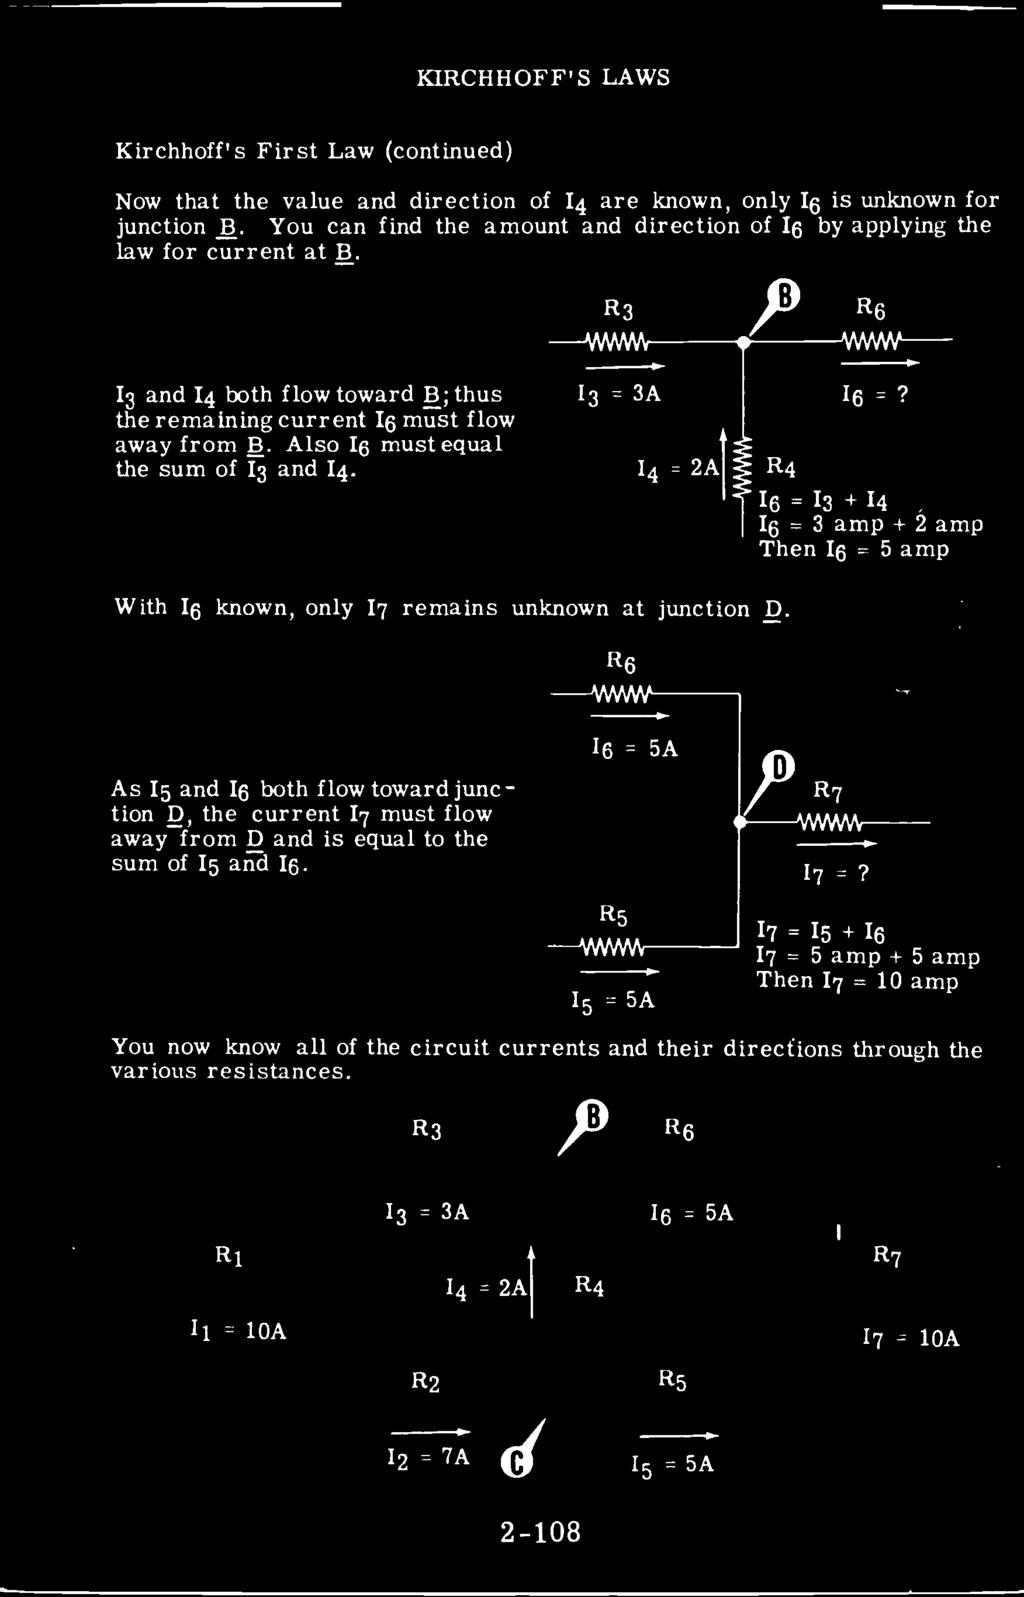 KIRCHHOFF'S LAWS Kirchhoff's First Law (continued) Now that the value and direction of 14 are known, only 16 is unknown for junction B.